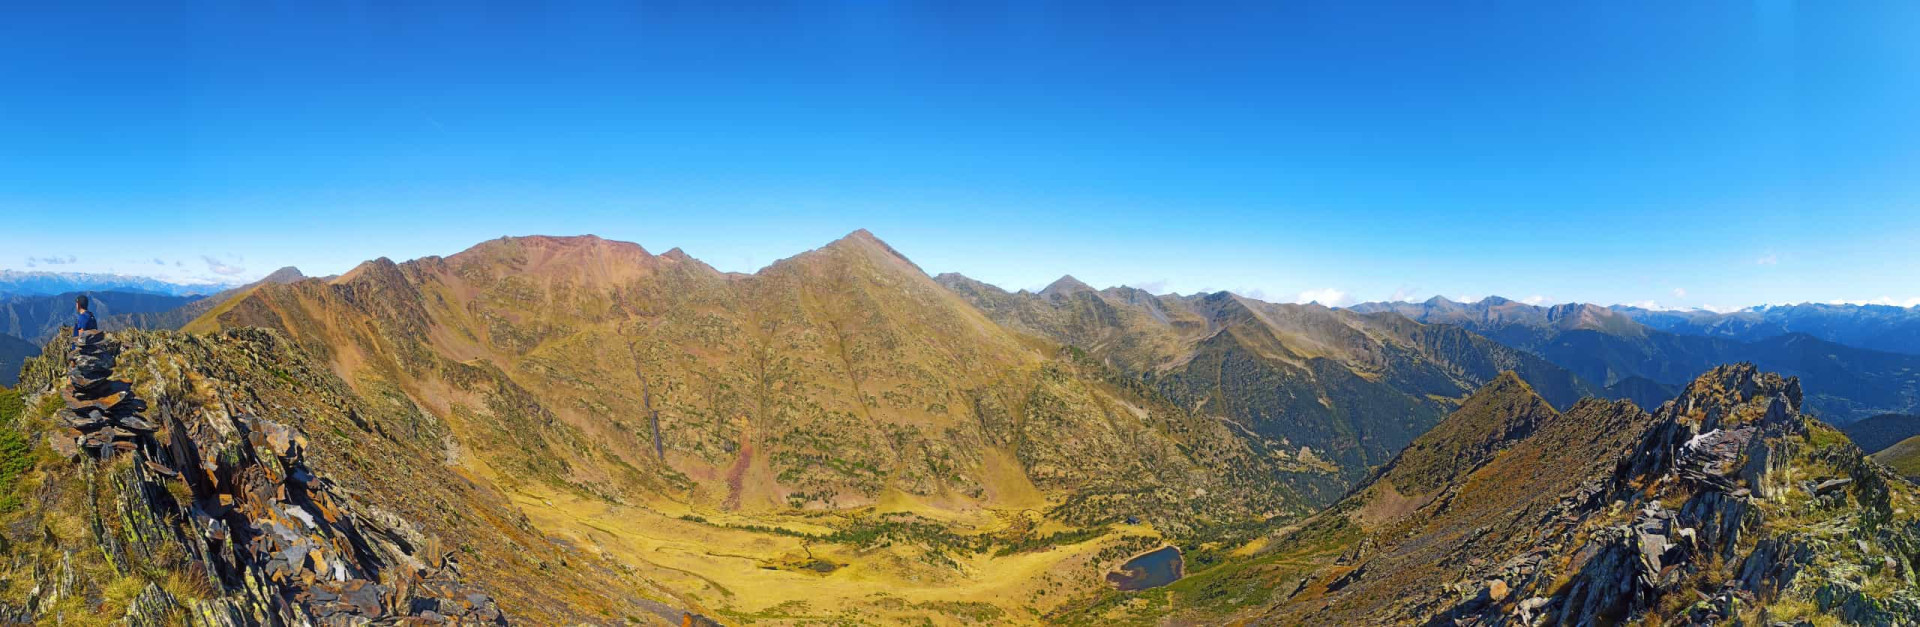 <p>For visitors with the hiking bug, Pic del Port Vell is a must. Straddling the border with Spain, the trail leading to the summit of 8,711 feet (2,655 m) is lined with colorful wildflowers and sturdy mountain grasses. If you're lucky, you might even get a glimpse of the beautiful Pyrenean chamois ibex.</p><p><a href="https://www.msn.com/en-za/community/channel/vid-7xx8mnucu55yw63we9va2gwr7uihbxwc68fxqp25x6tg4ftibpra?cvid=94631541bc0f4f89bfd59158d696ad7e">Follow us and access great exclusive content every day</a></p>